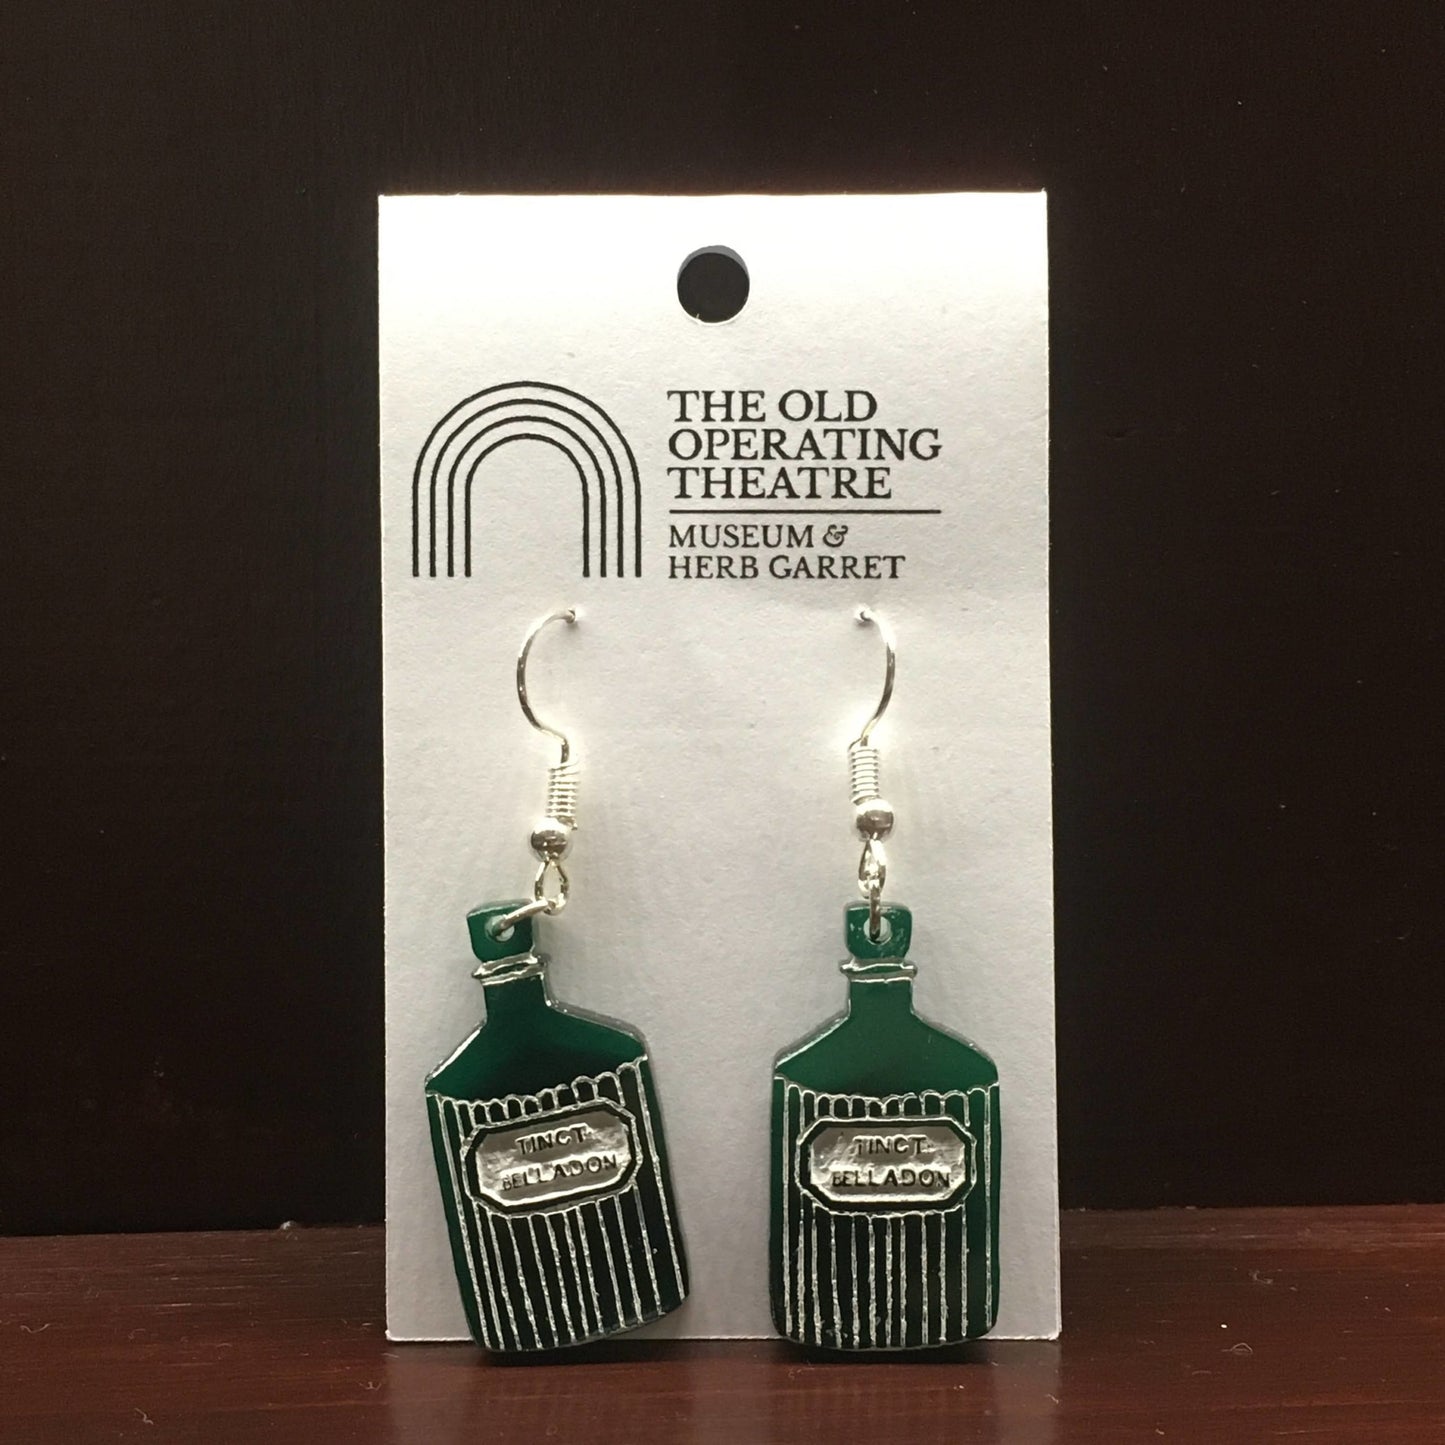 Pair of green dangle earrings in the shape of a bottle with the label 'tinct. belladon'